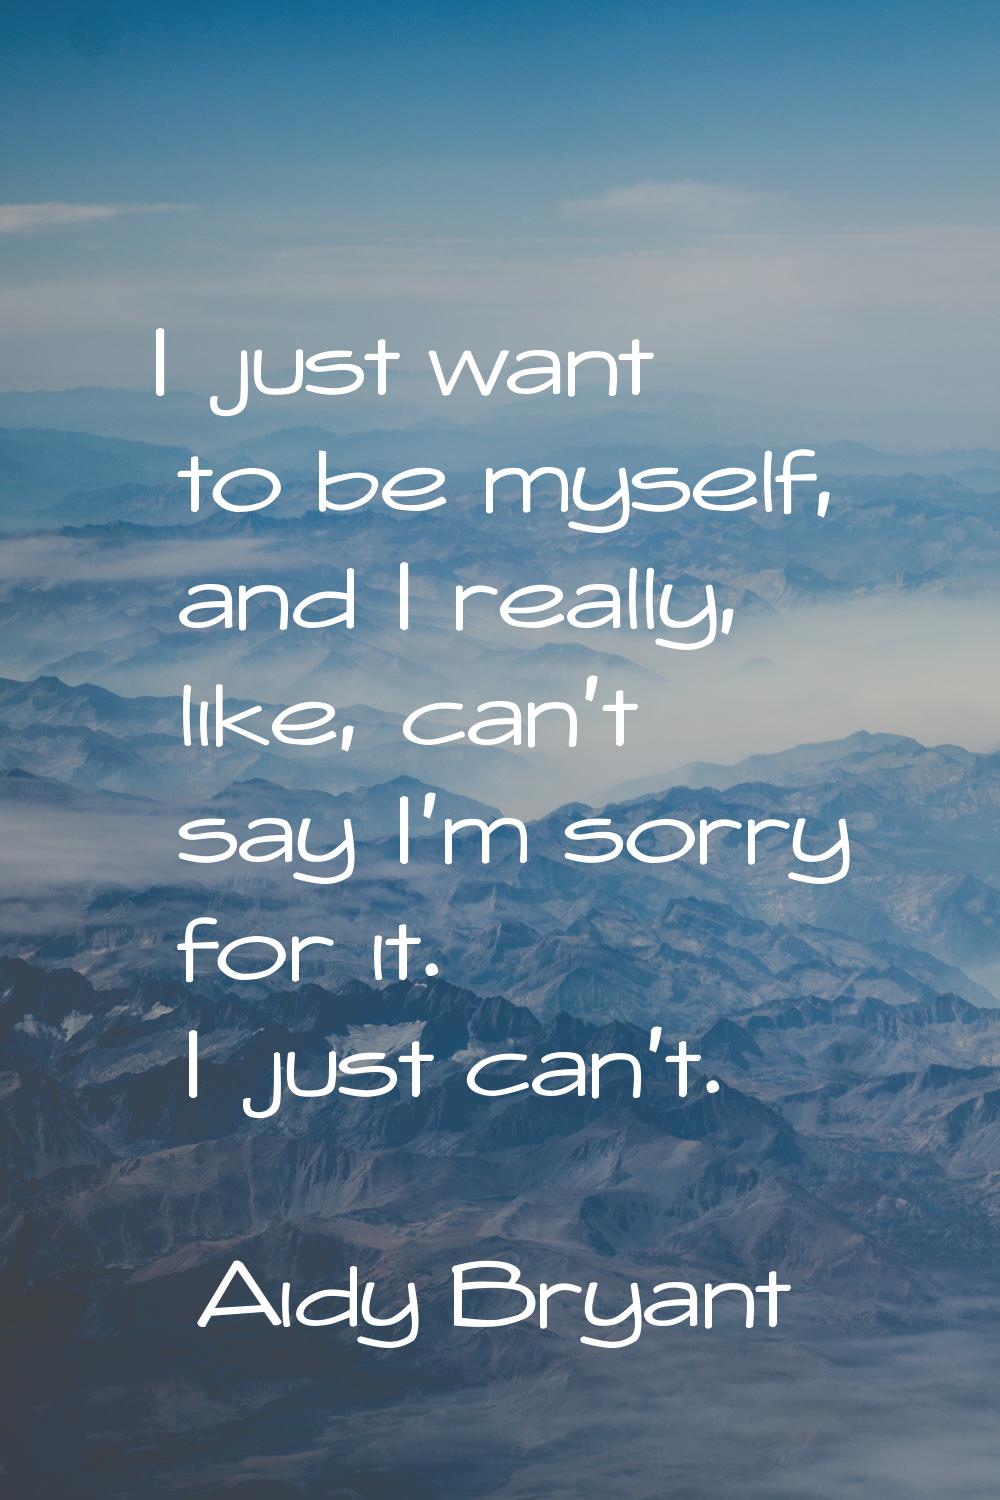 I just want to be myself, and I really, like, can't say I'm sorry for it. I just can't.